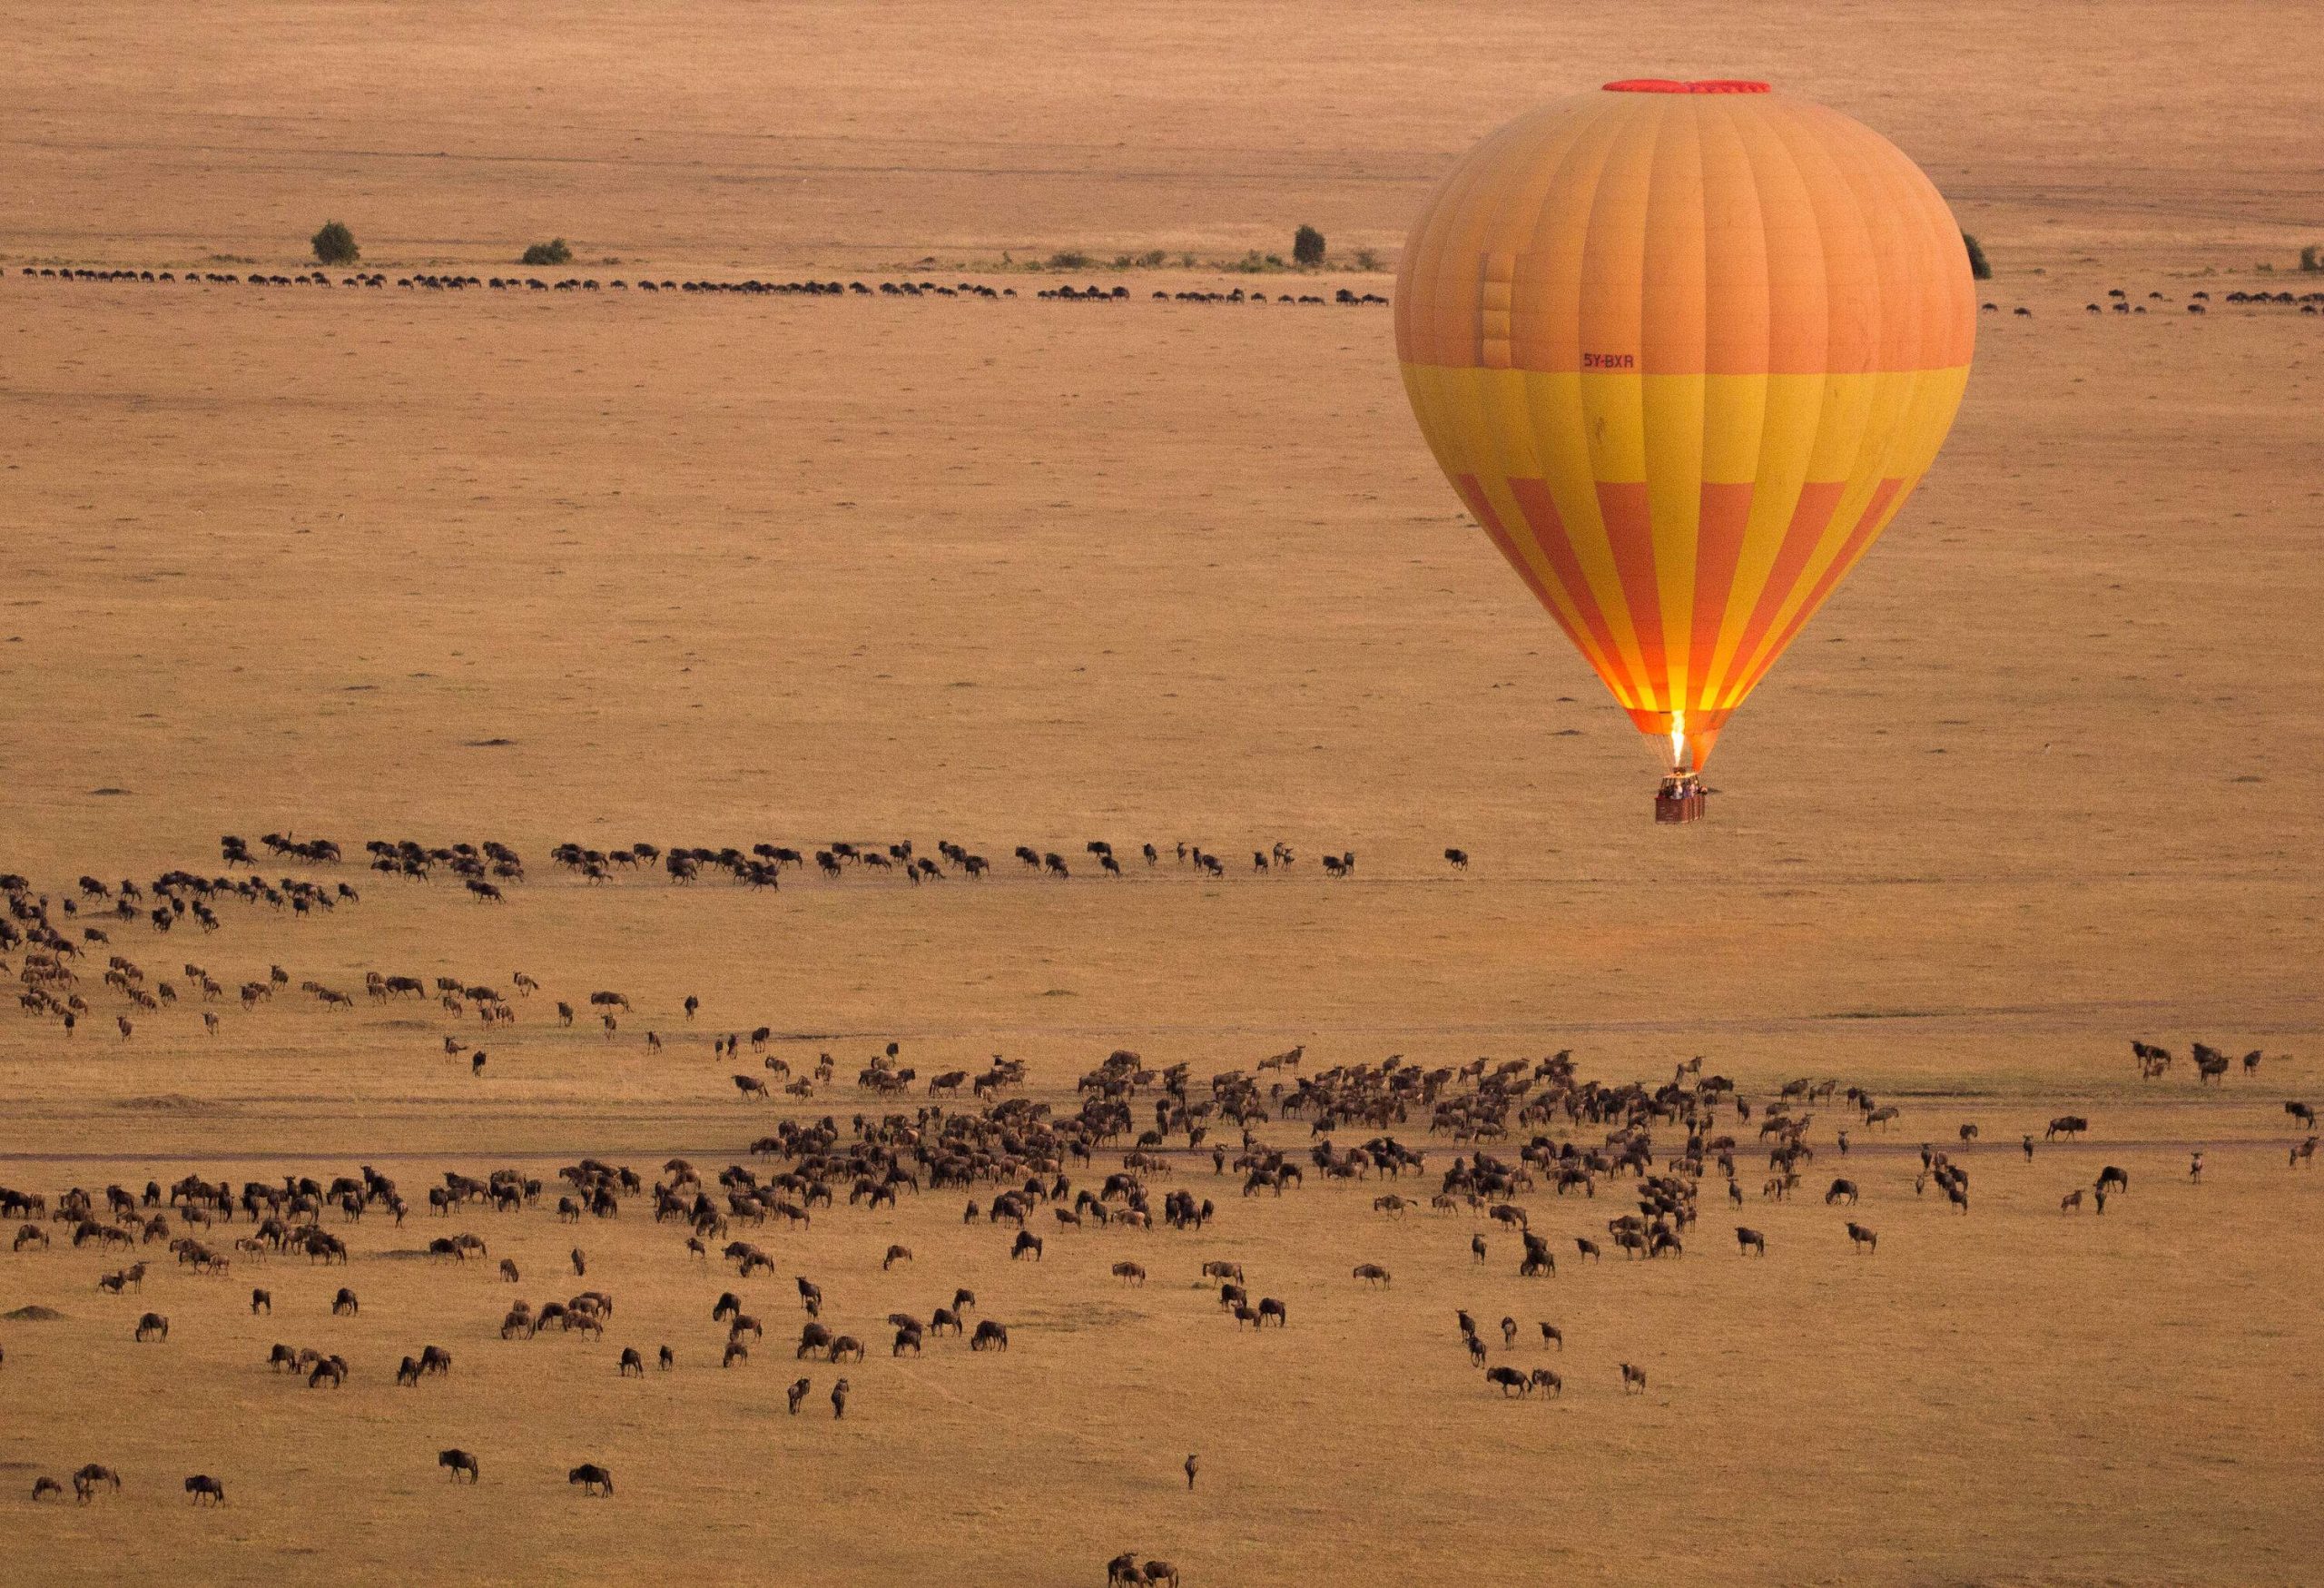 A hot air balloon is to depart from the savannah surrounded by numerous grazing wildebeests.